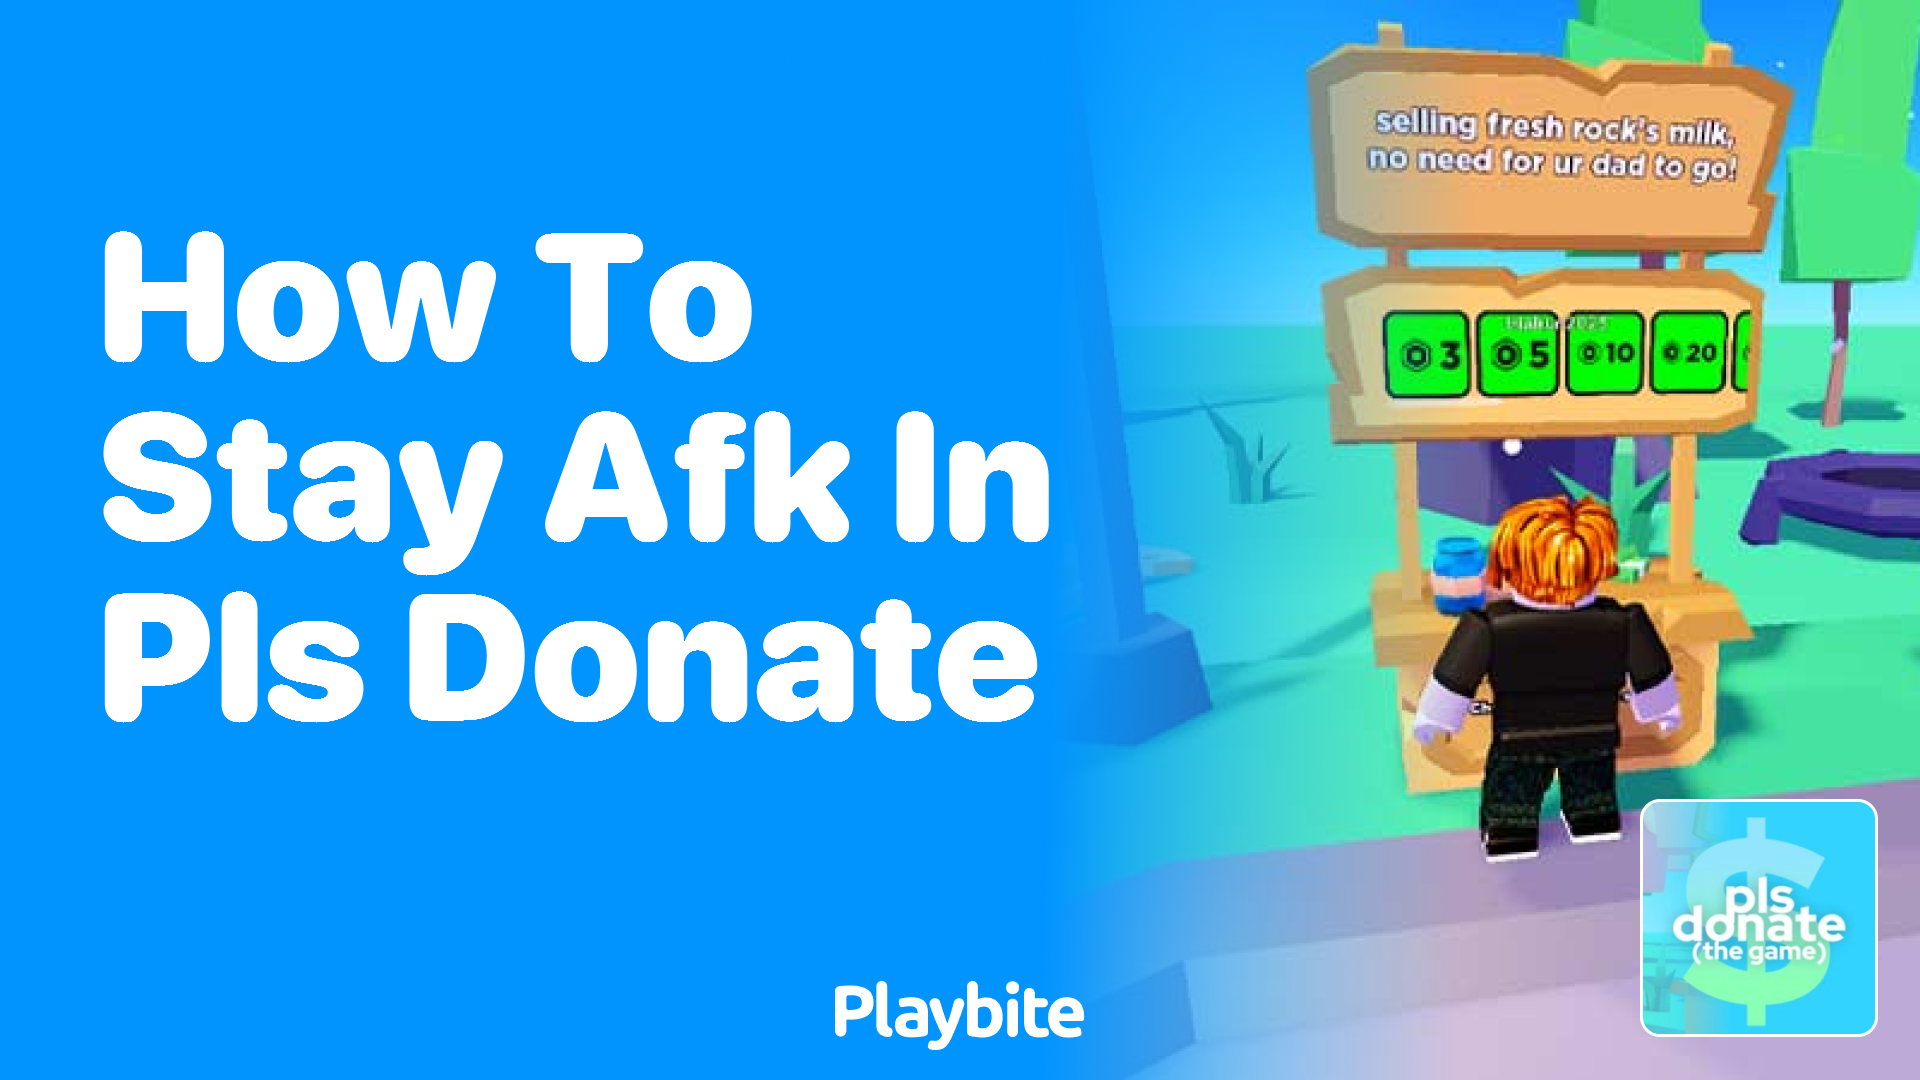 How to Stay AFK in PLS DONATE